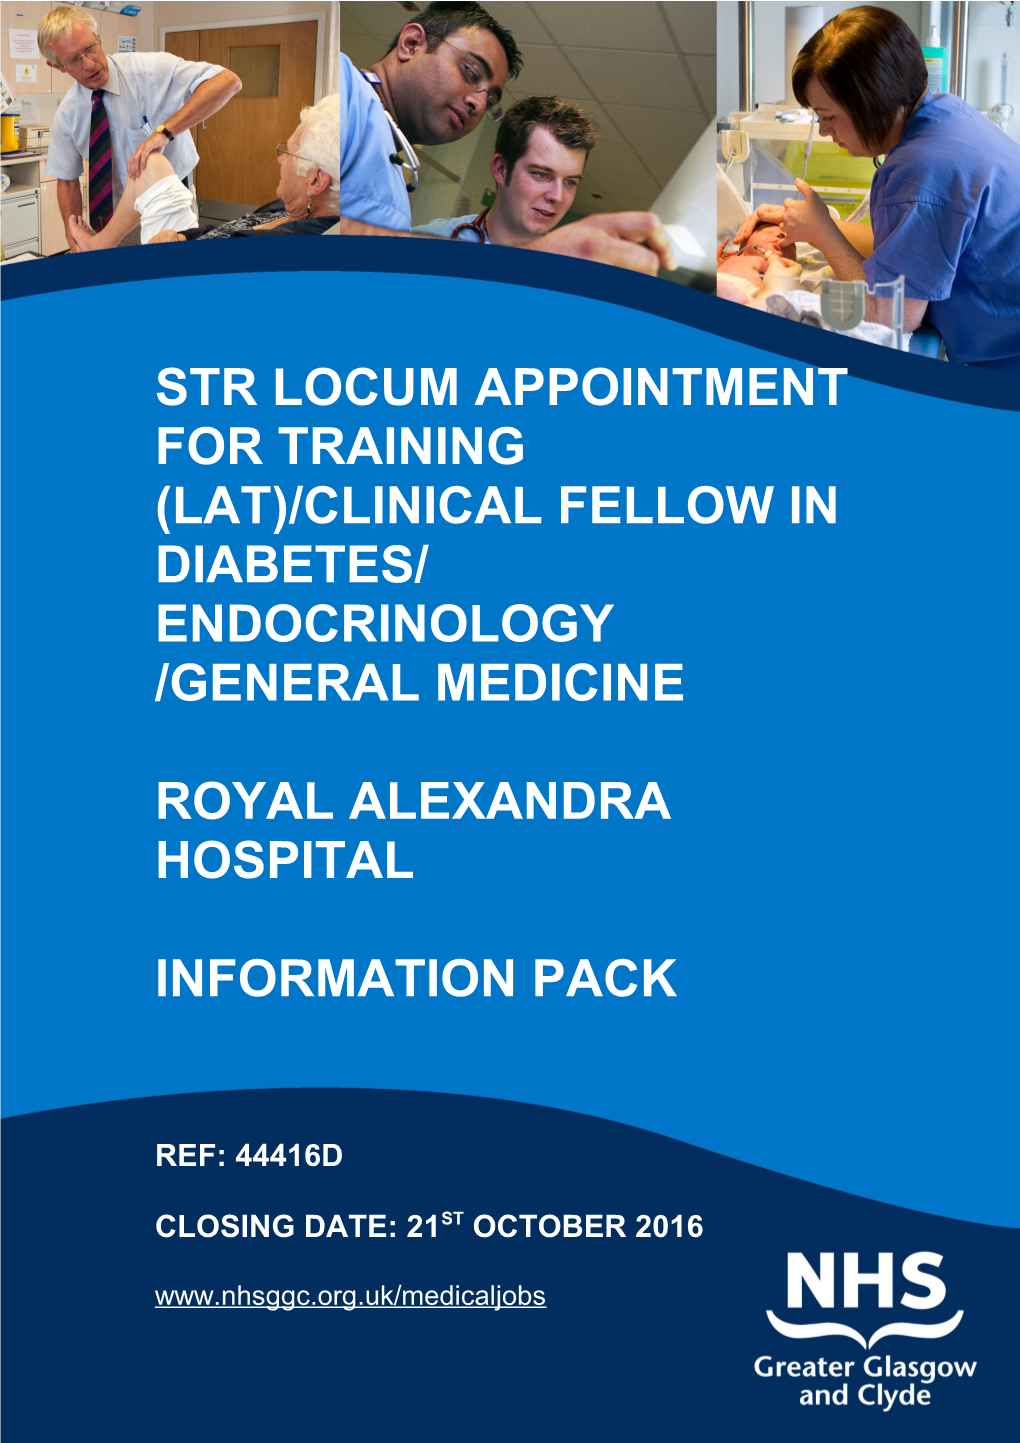 Str Locum Appointment for Training (LAT)/Clinical Fellow in Diabetes